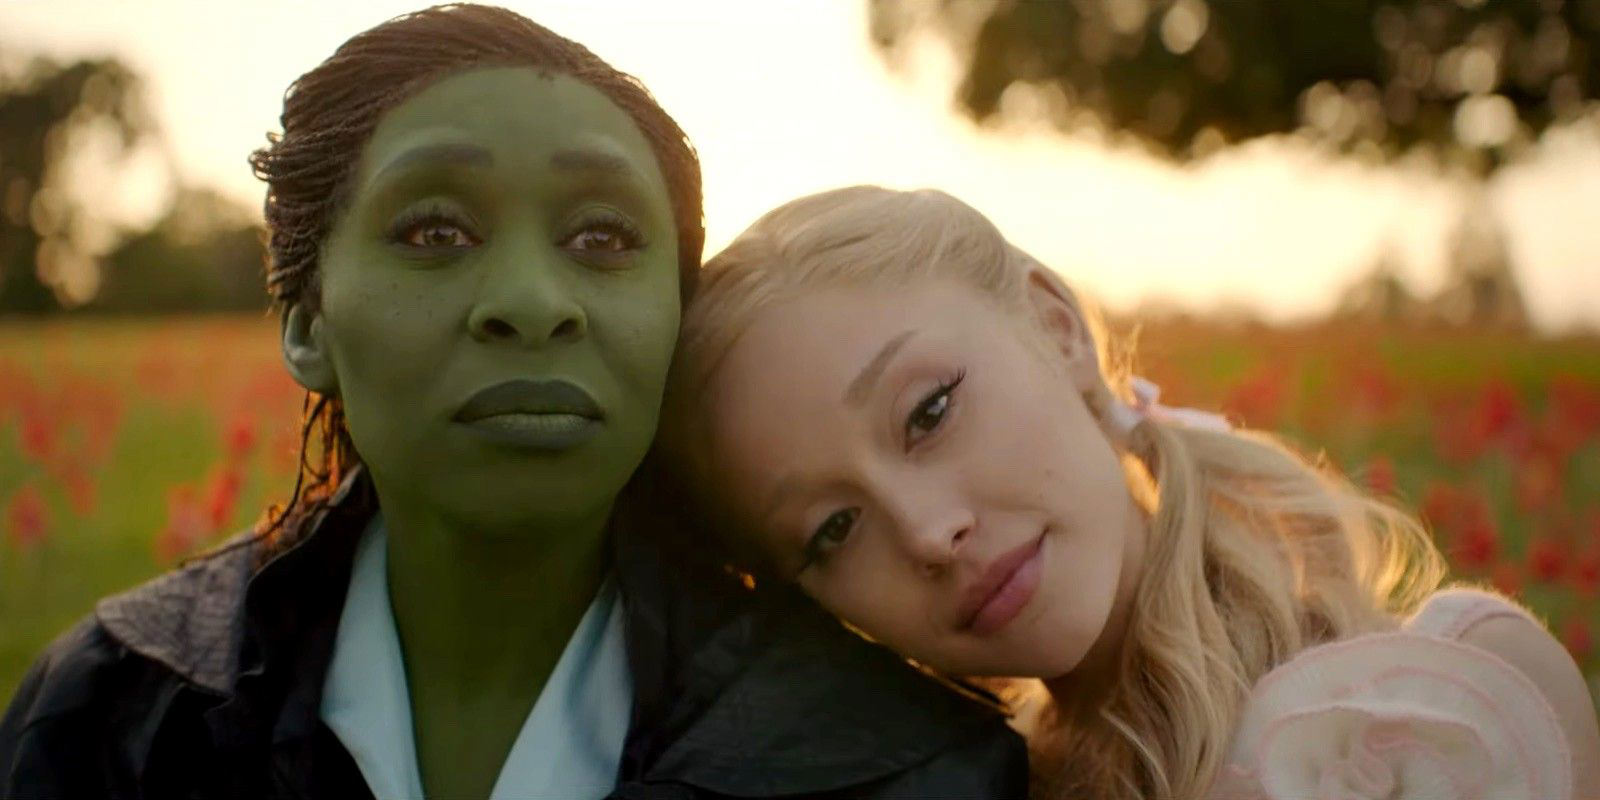 Wicked Movie Poster Teases Shadows In Elphaba & Glinda's Friendship